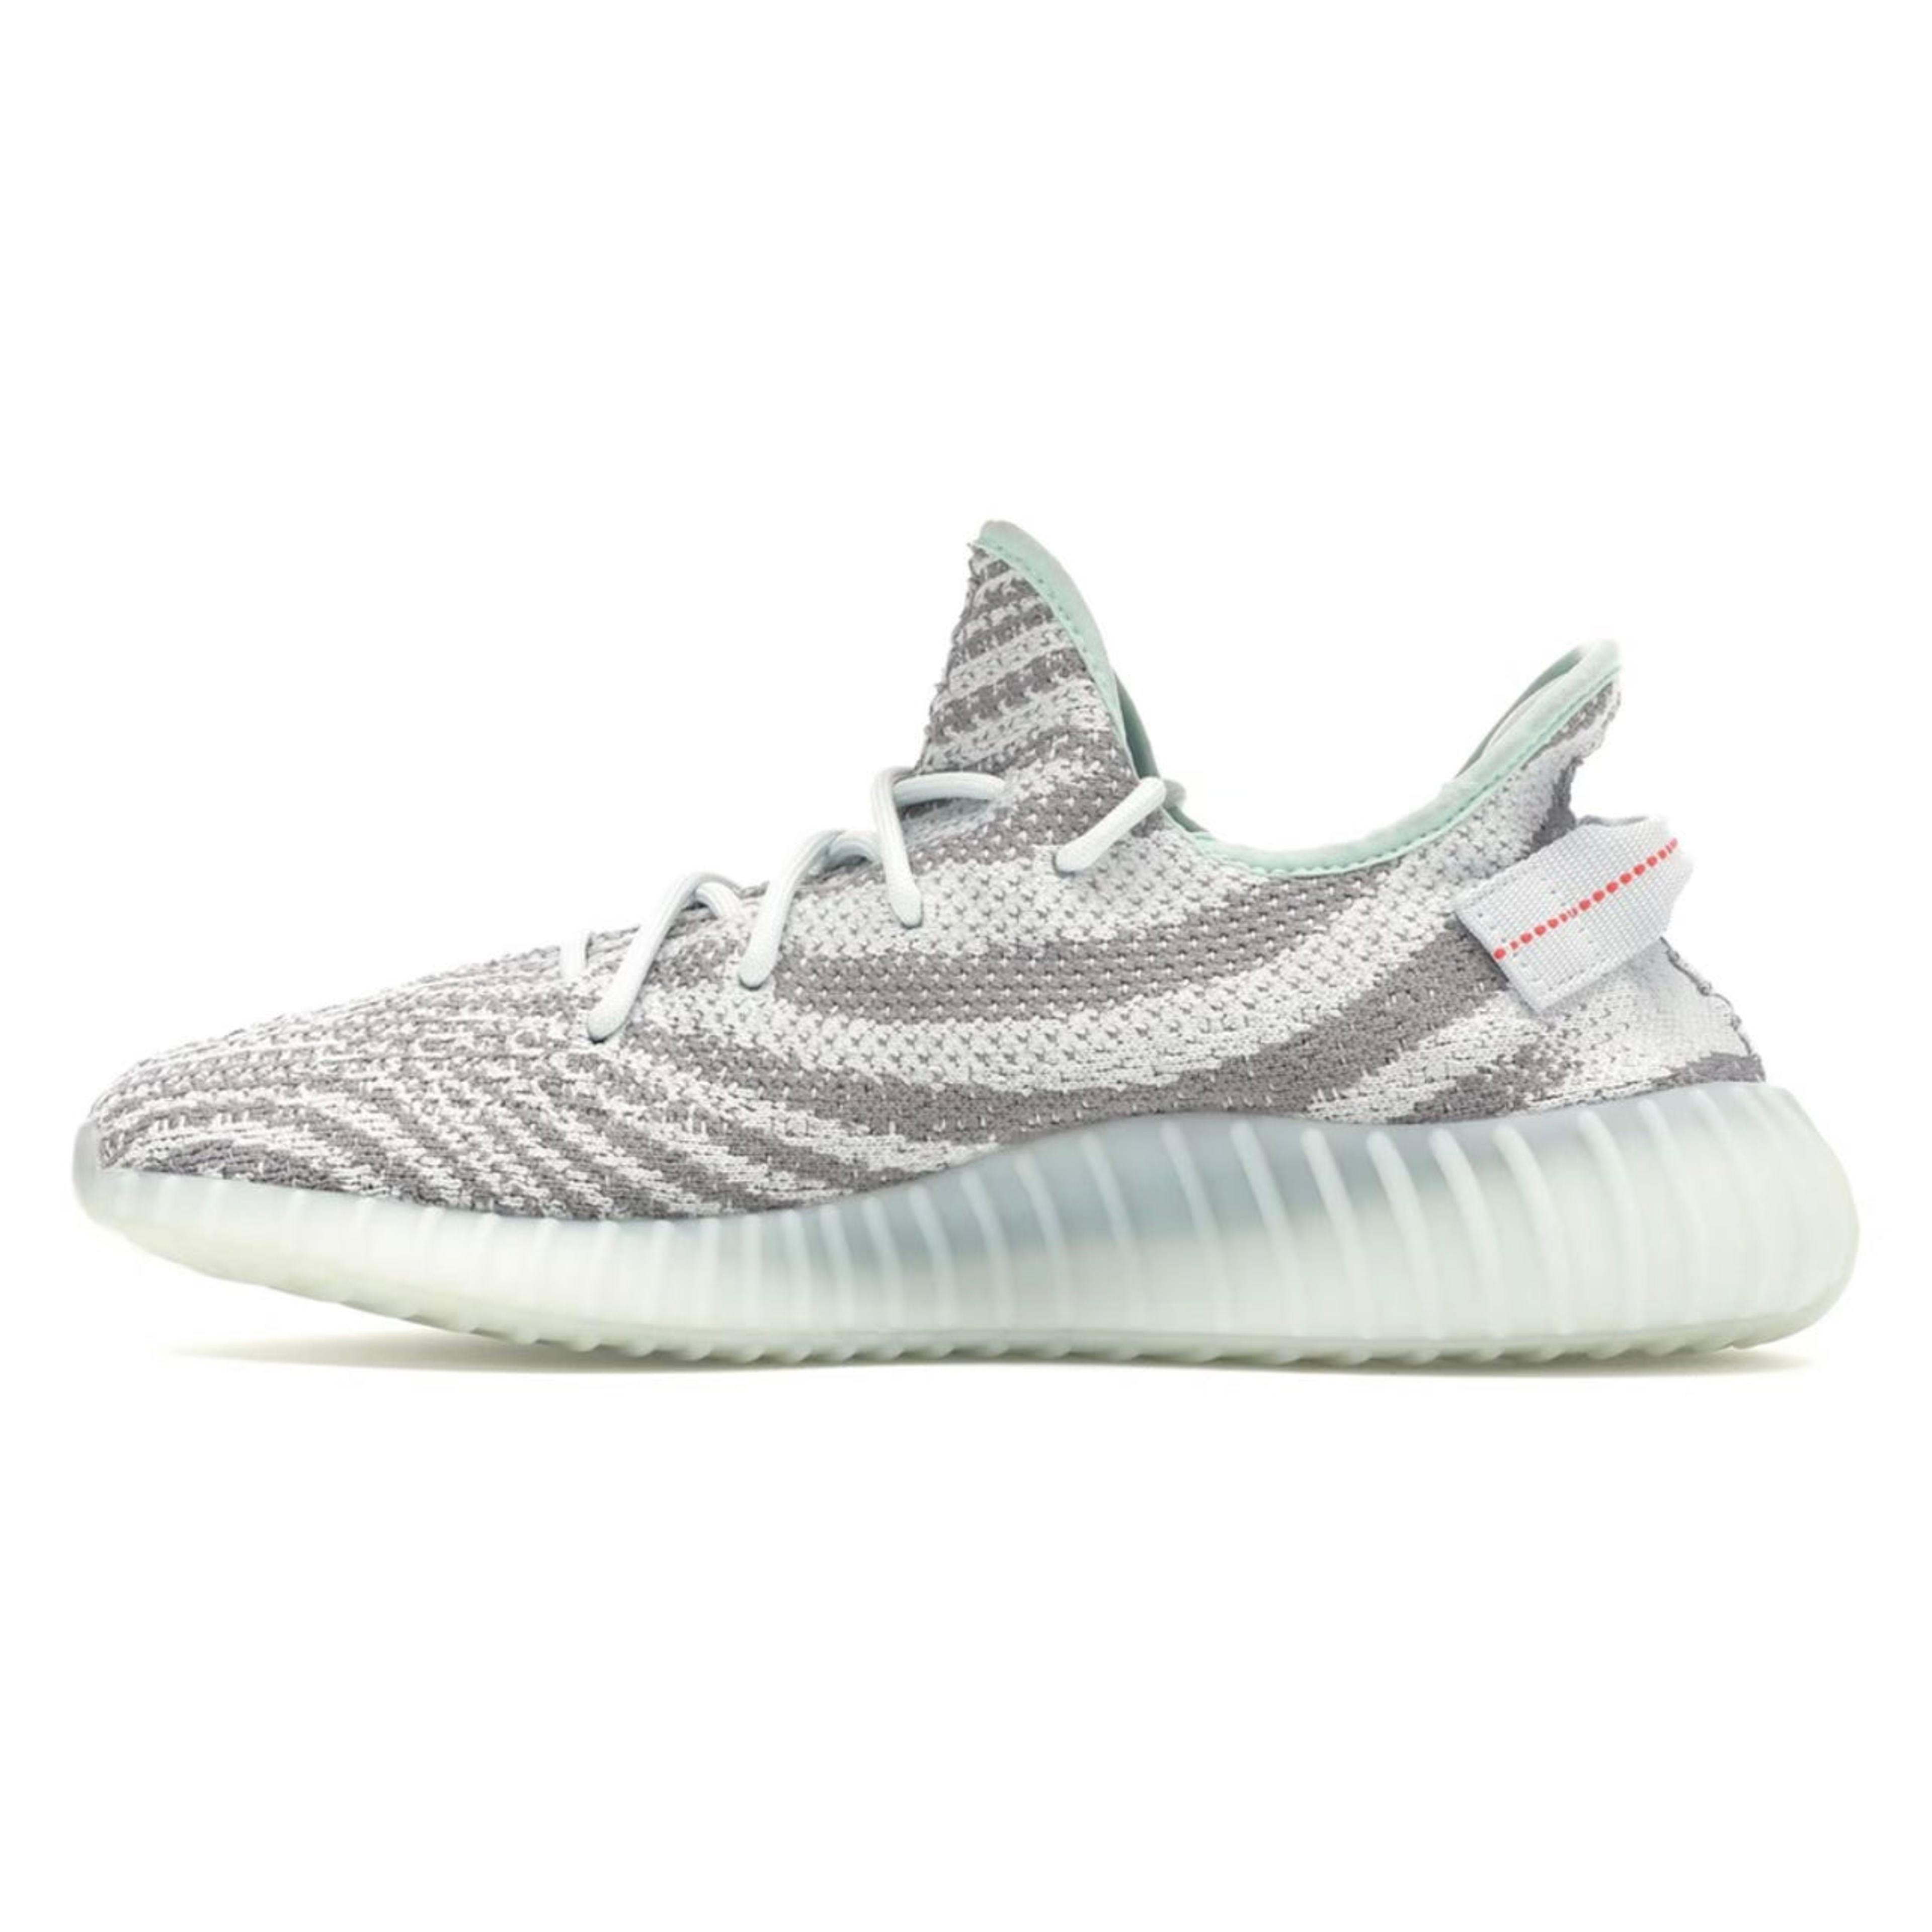 Alternate View 1 of Adidas Yeezy Boost 350 V2 Blue Tint